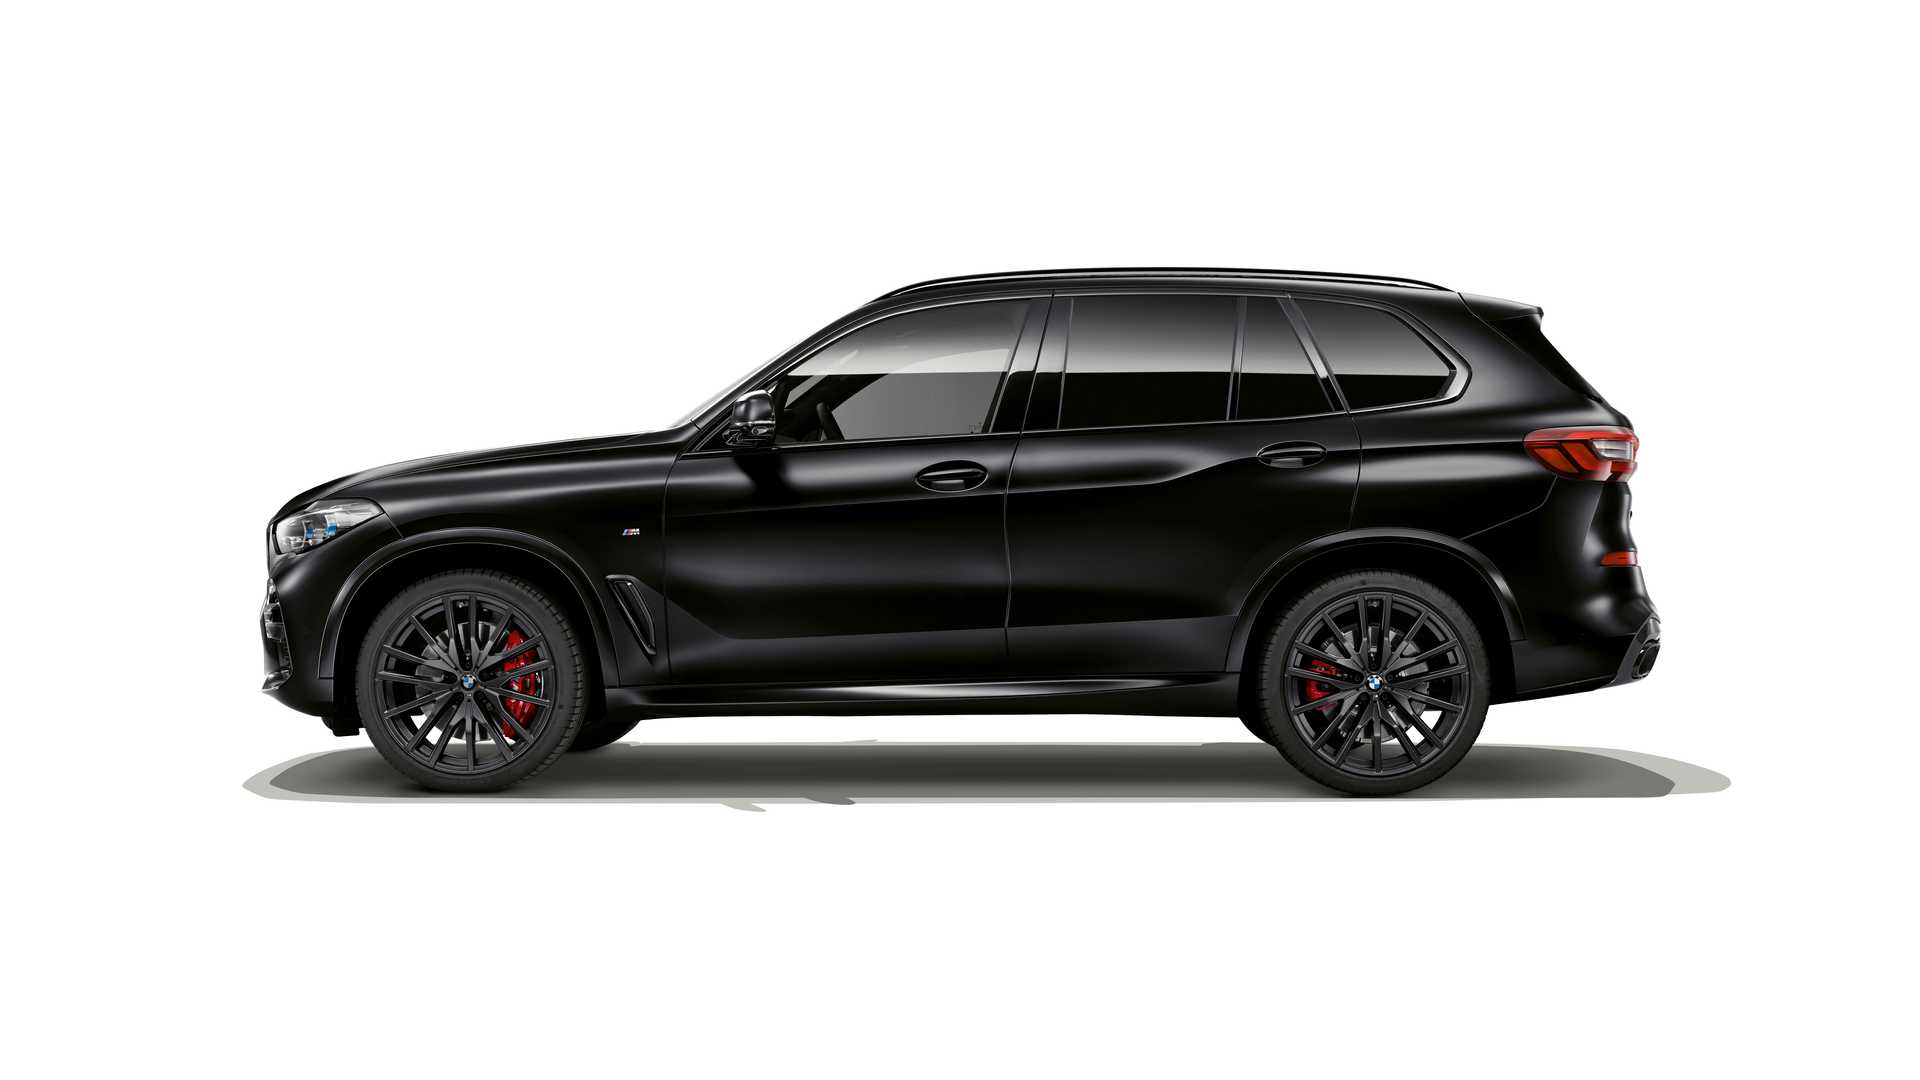 2022 BMW X5 Black Vermilion Debuts With Red Grille And Plenty Of Kit